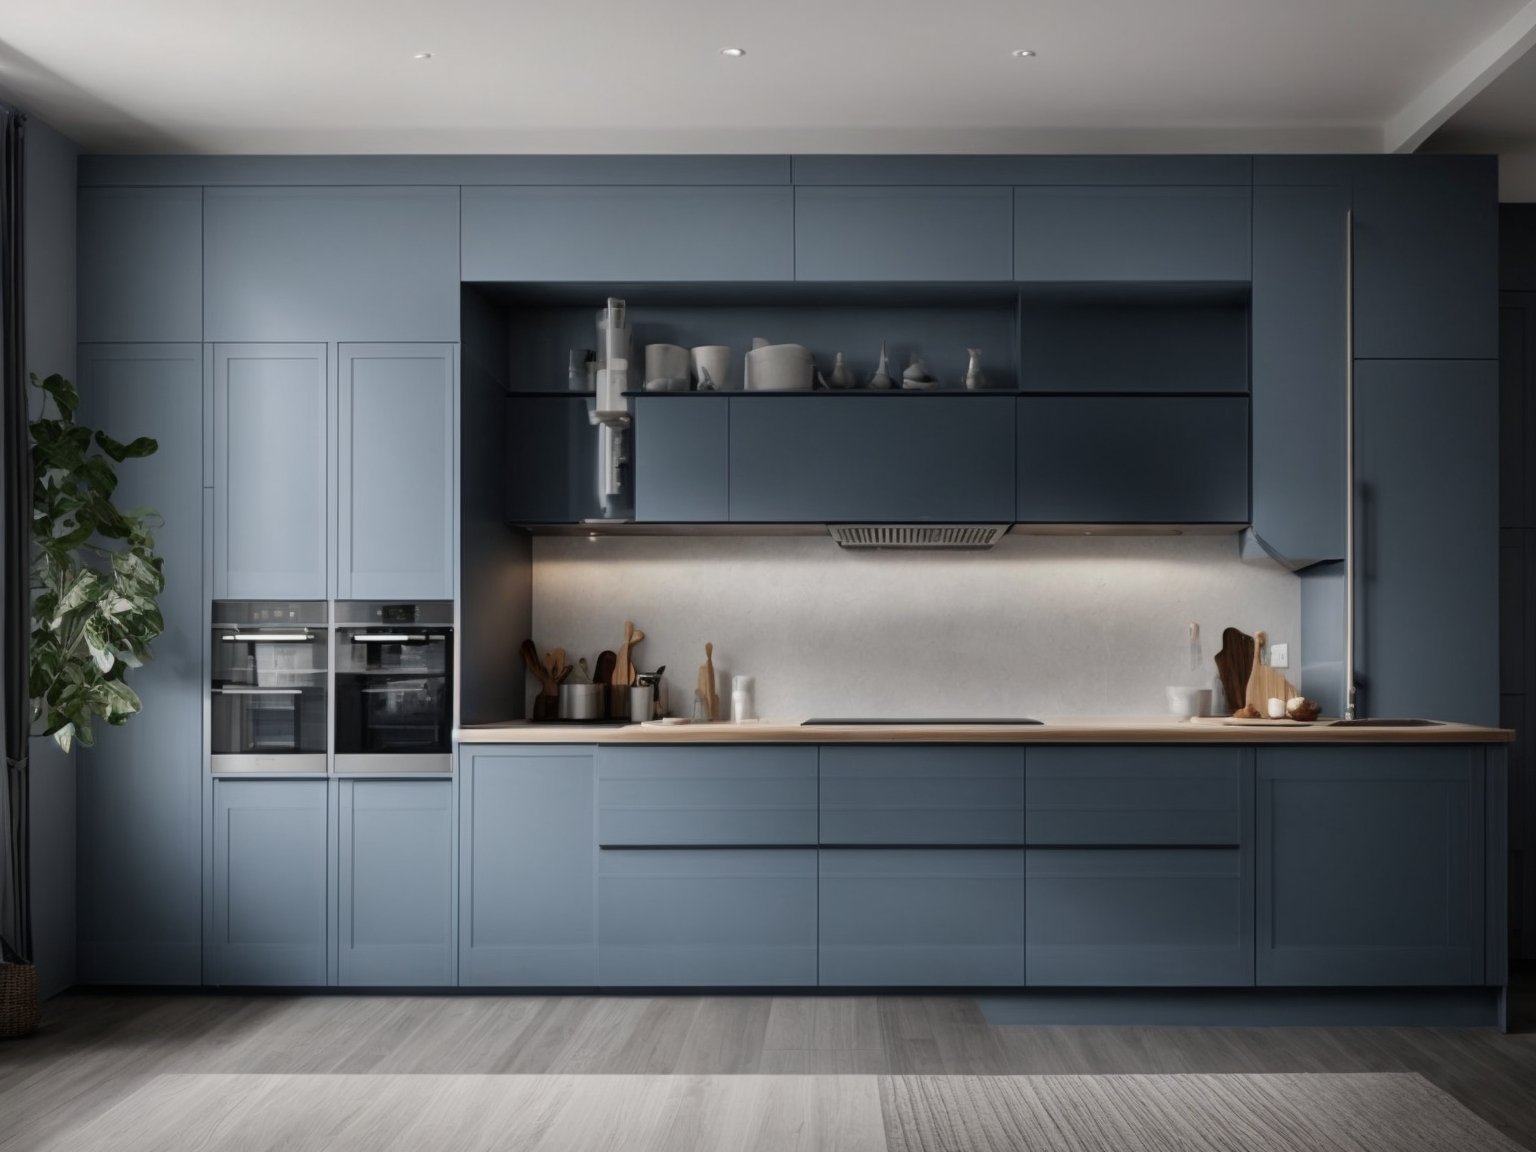 A photo of sleek blue grey kitchen cabinets with stainless steel hardware and marble countertops.